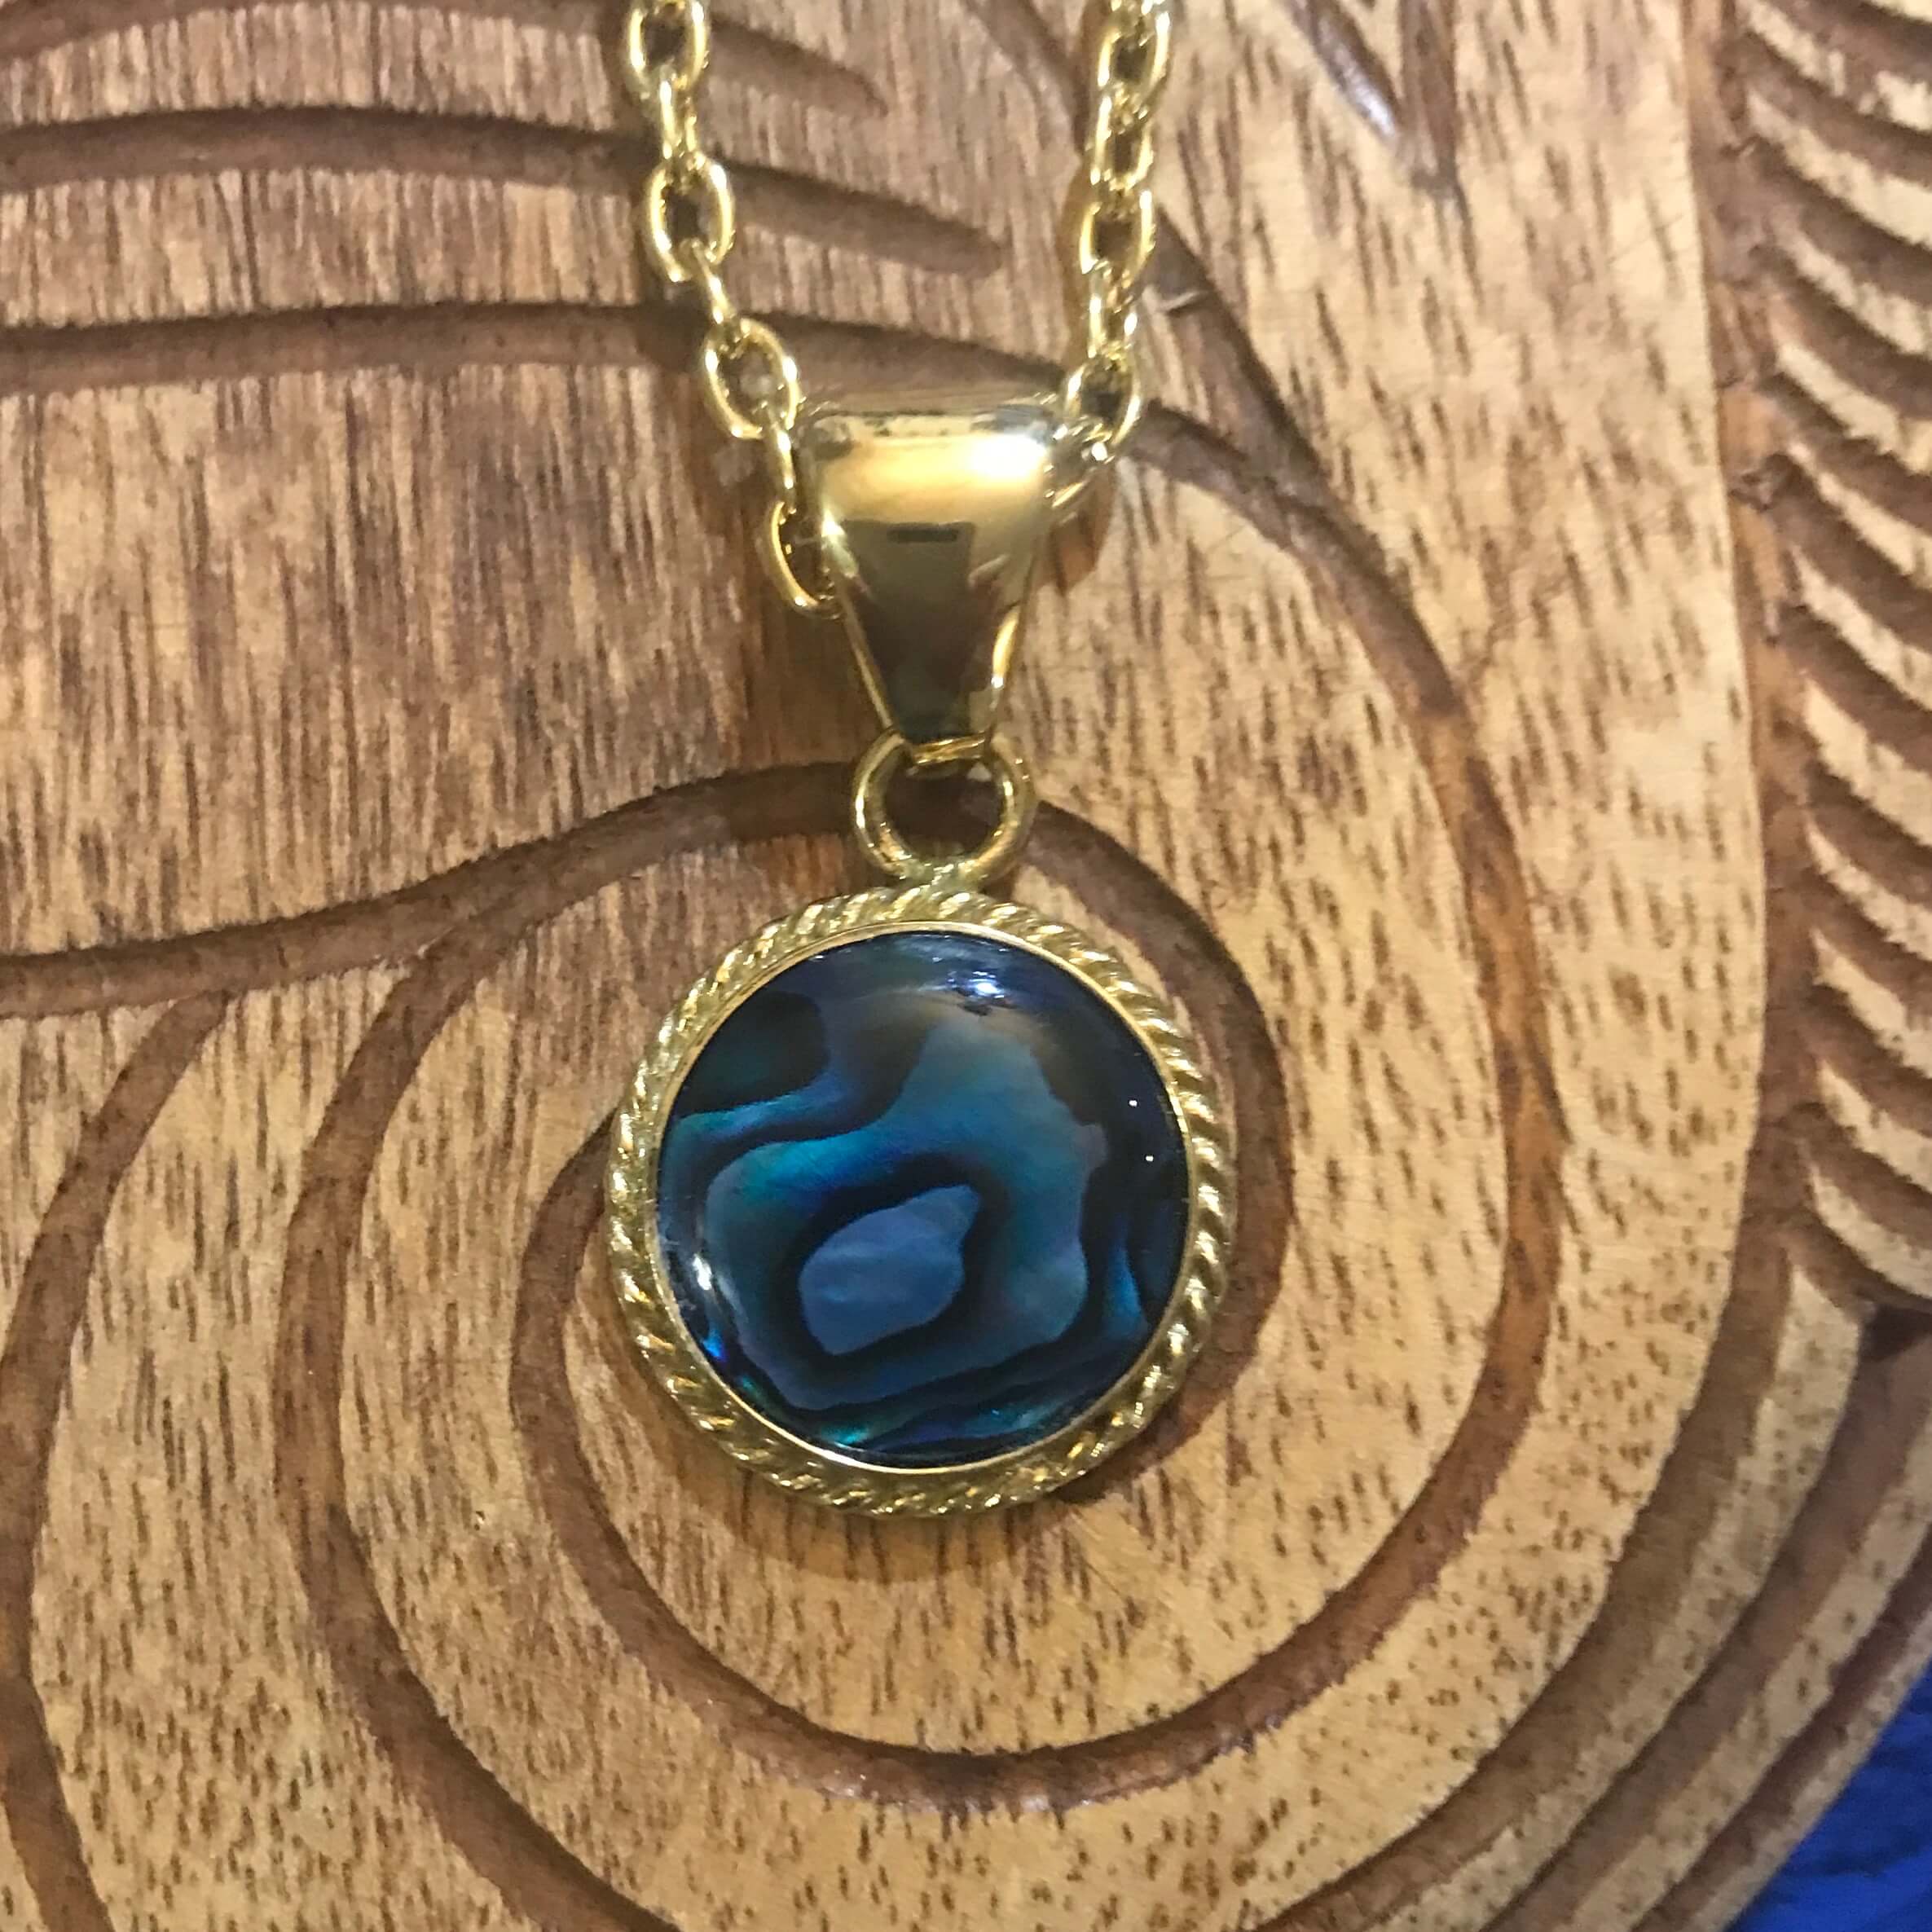 Close up view of a round blue abalone pendant with alchemia gold rope trim around the shell